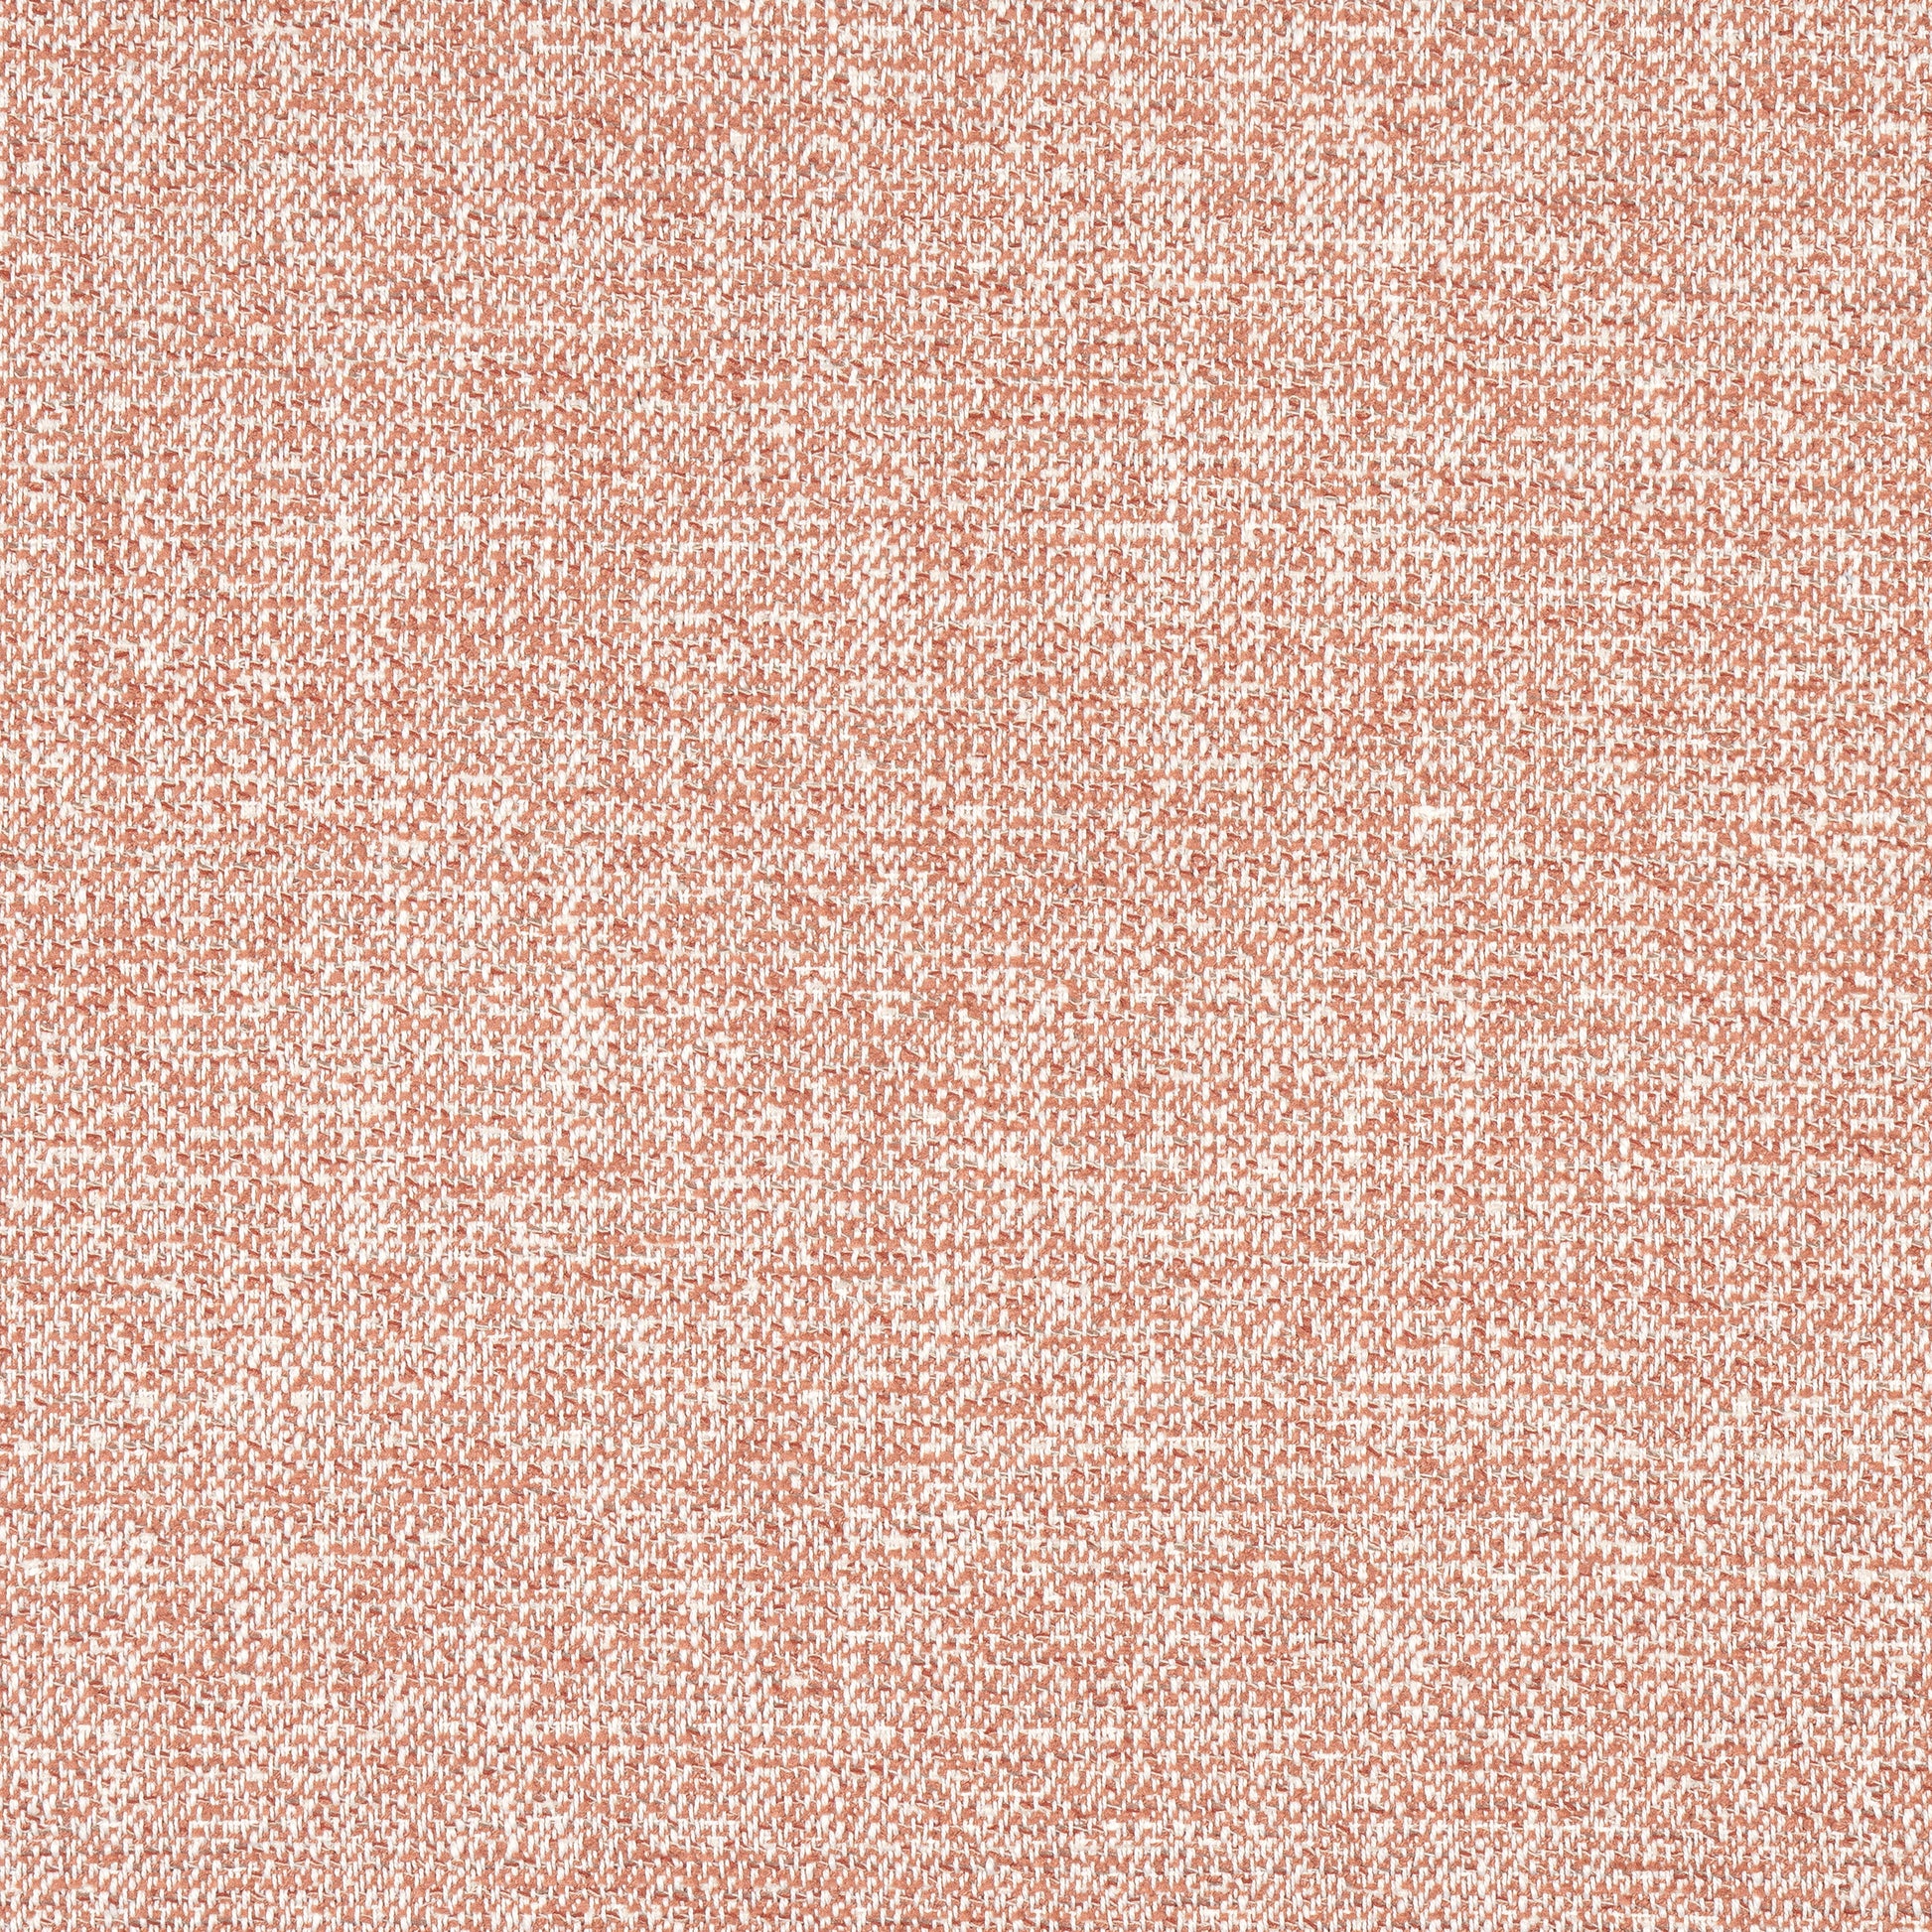 Purchase Thibaut Fabric Item# W8799 pattern name Calais color Rouge